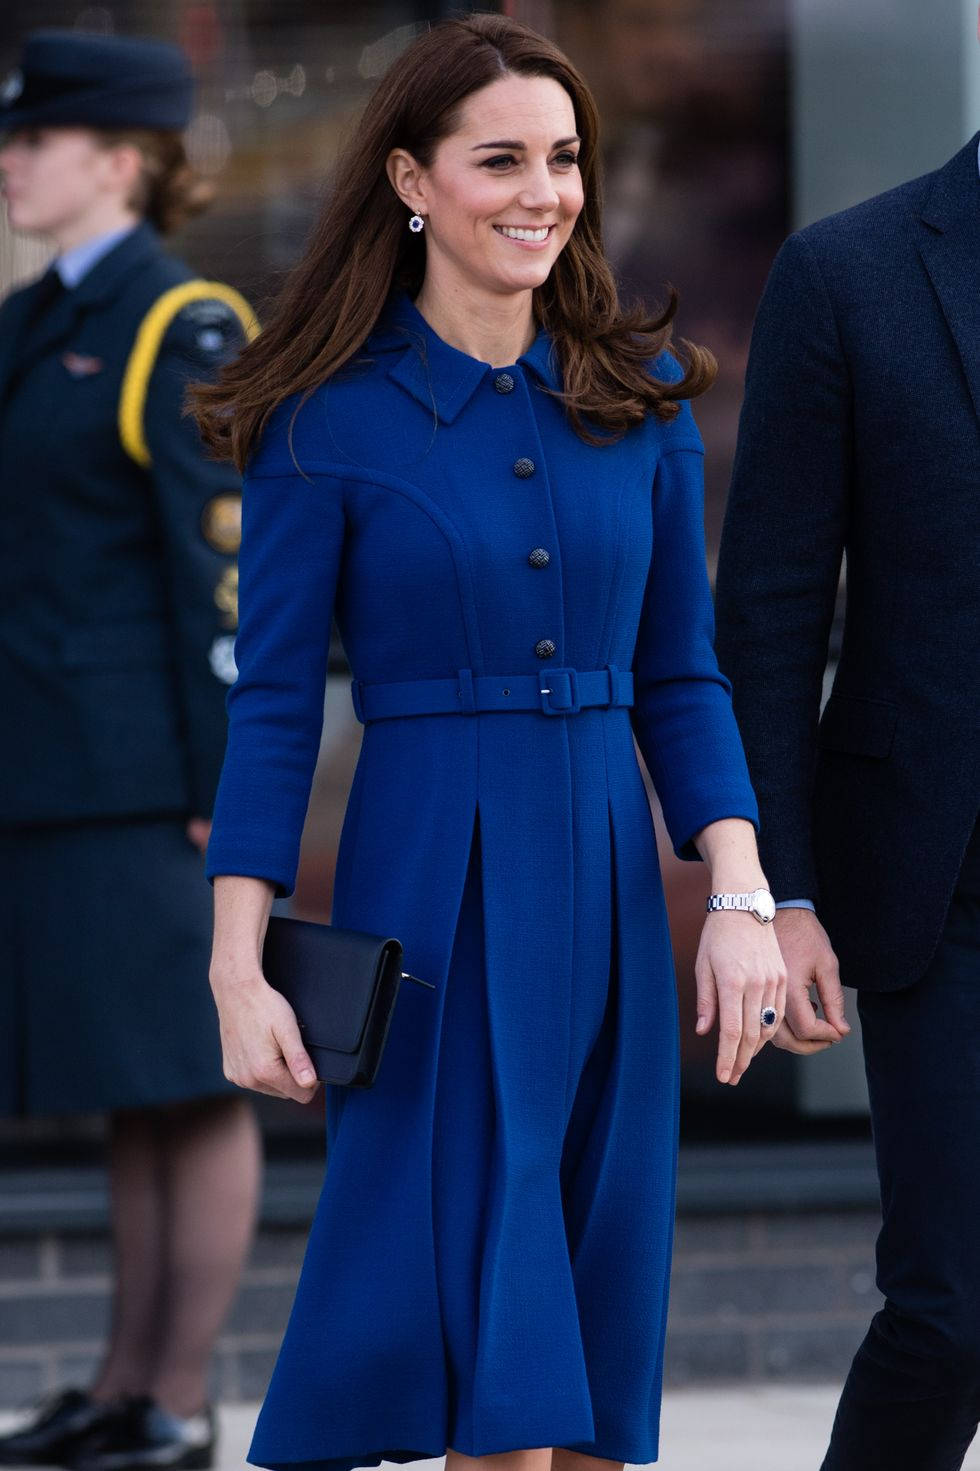 Duchess of Cambridge, Kate Middleton looking poised and elegant. Wallpaper